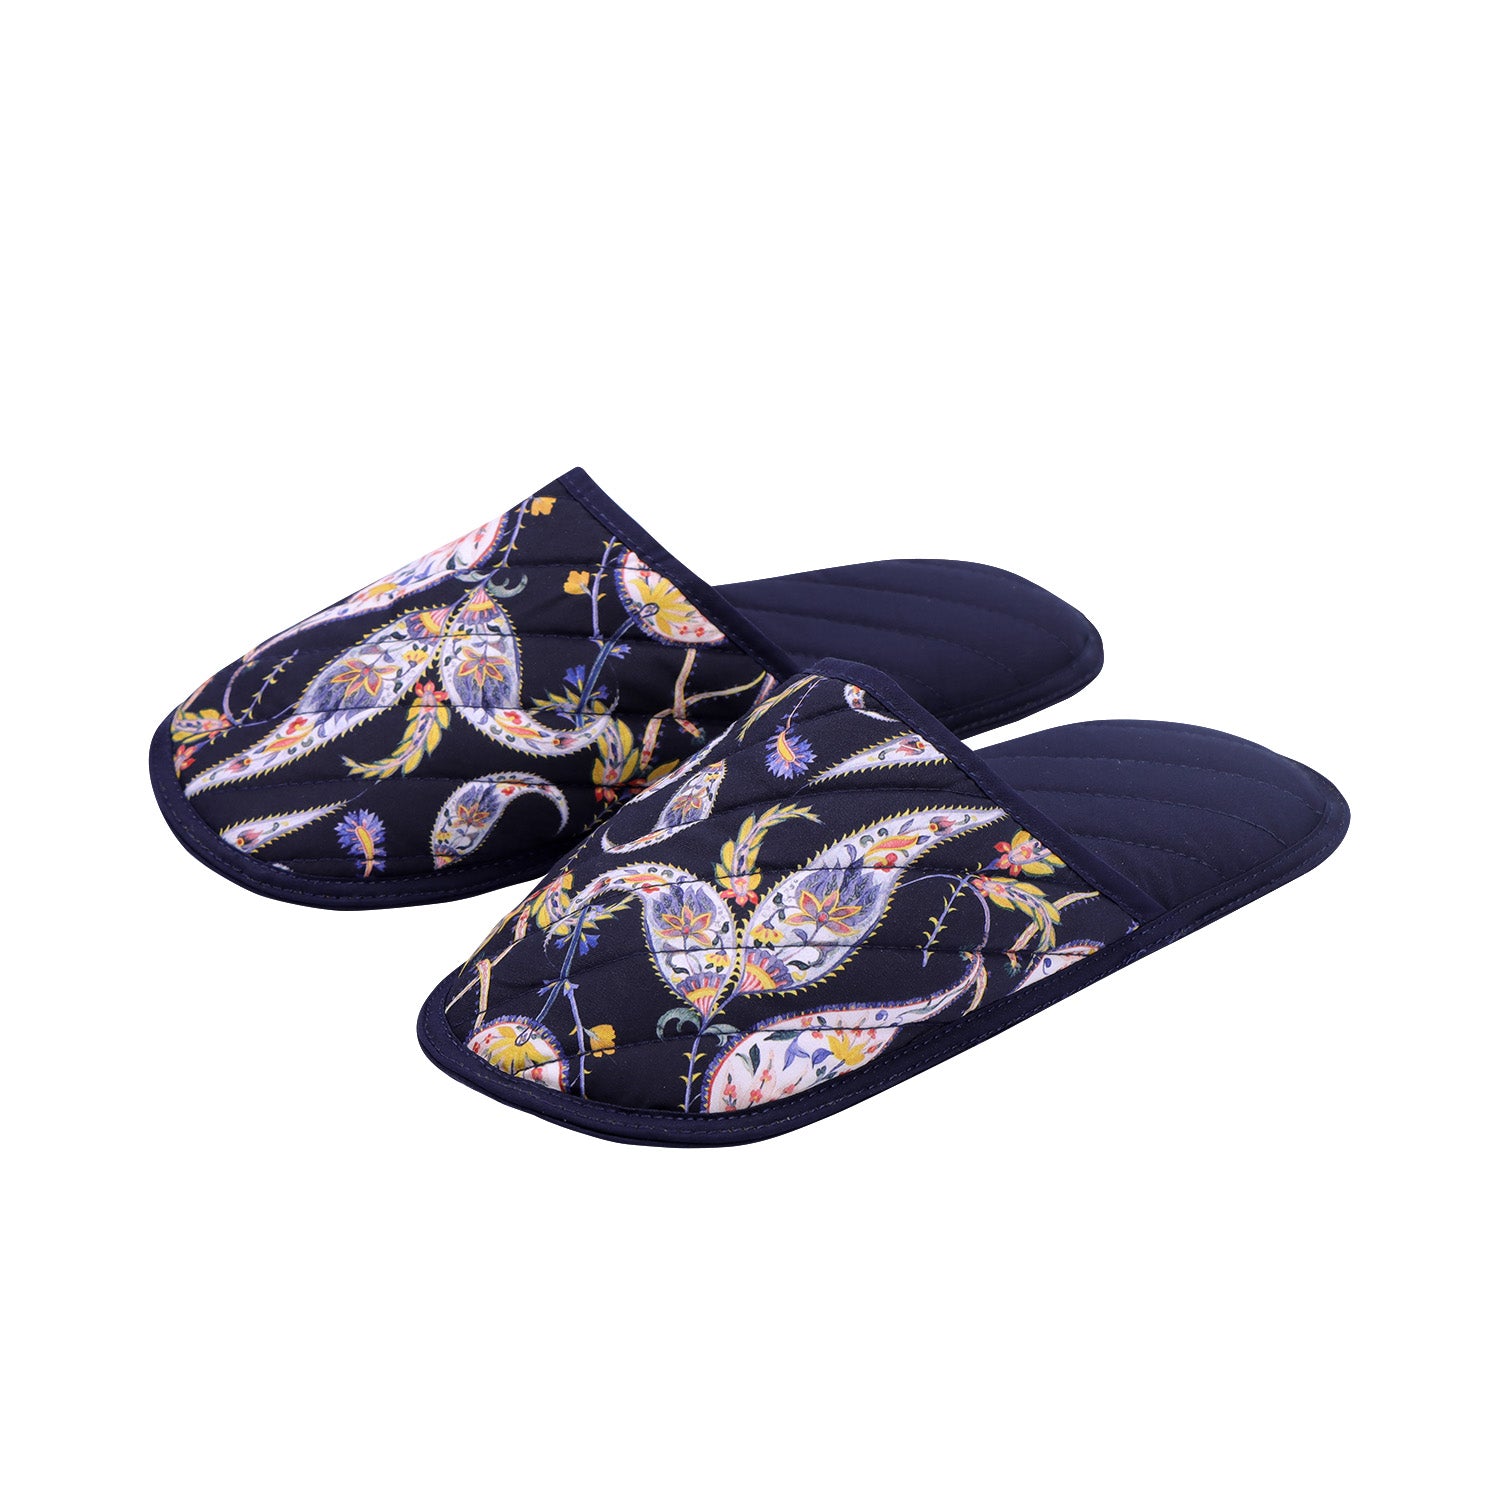 Handmade Embroidered Floral Beaded Sequin Chinese Women's Velvet Slippers  Wholesale Lot 48 Pairs New : Buy Online at Best Price in KSA - Souq is now  Amazon.sa: Fashion